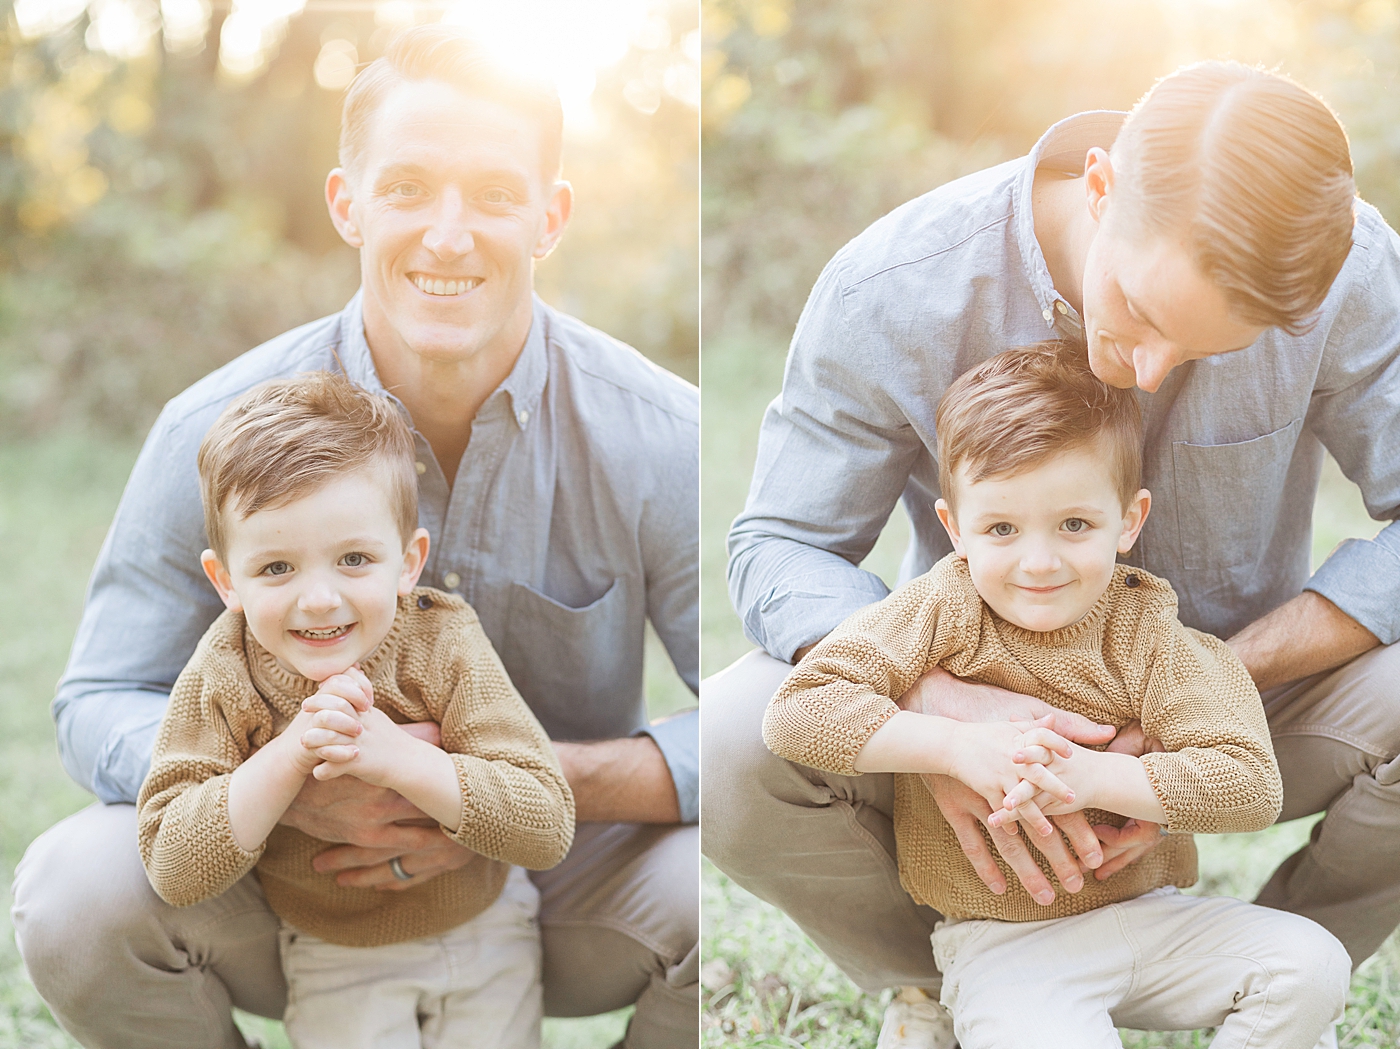 Father/son photo with the oldest boy. Sun is setting over Dad's head. Photo by Fresh Light Photography